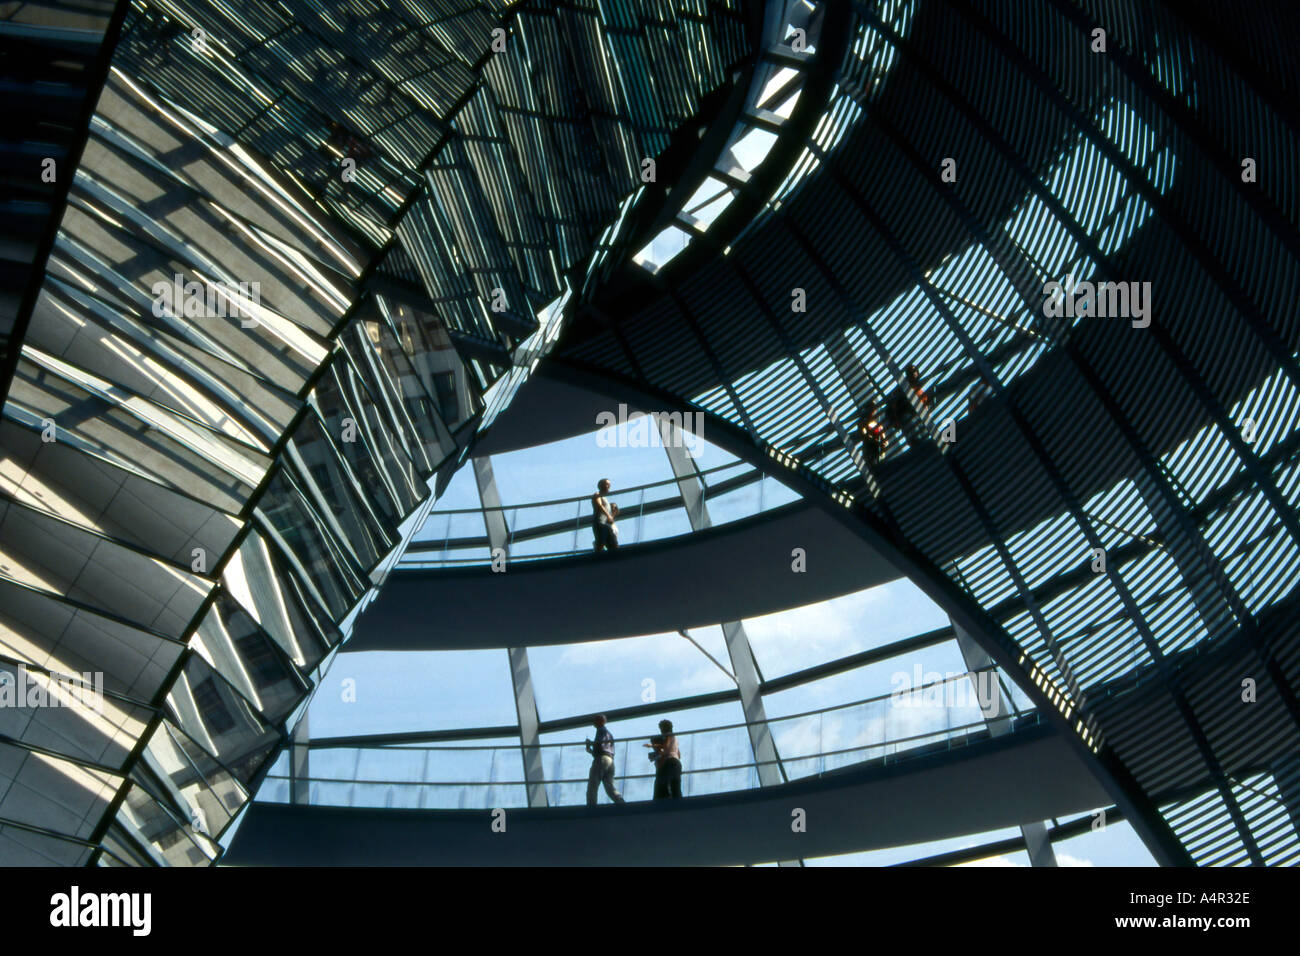 The Reichstag Dome in Berlin Germany designed by Norman Foster Stock Photo